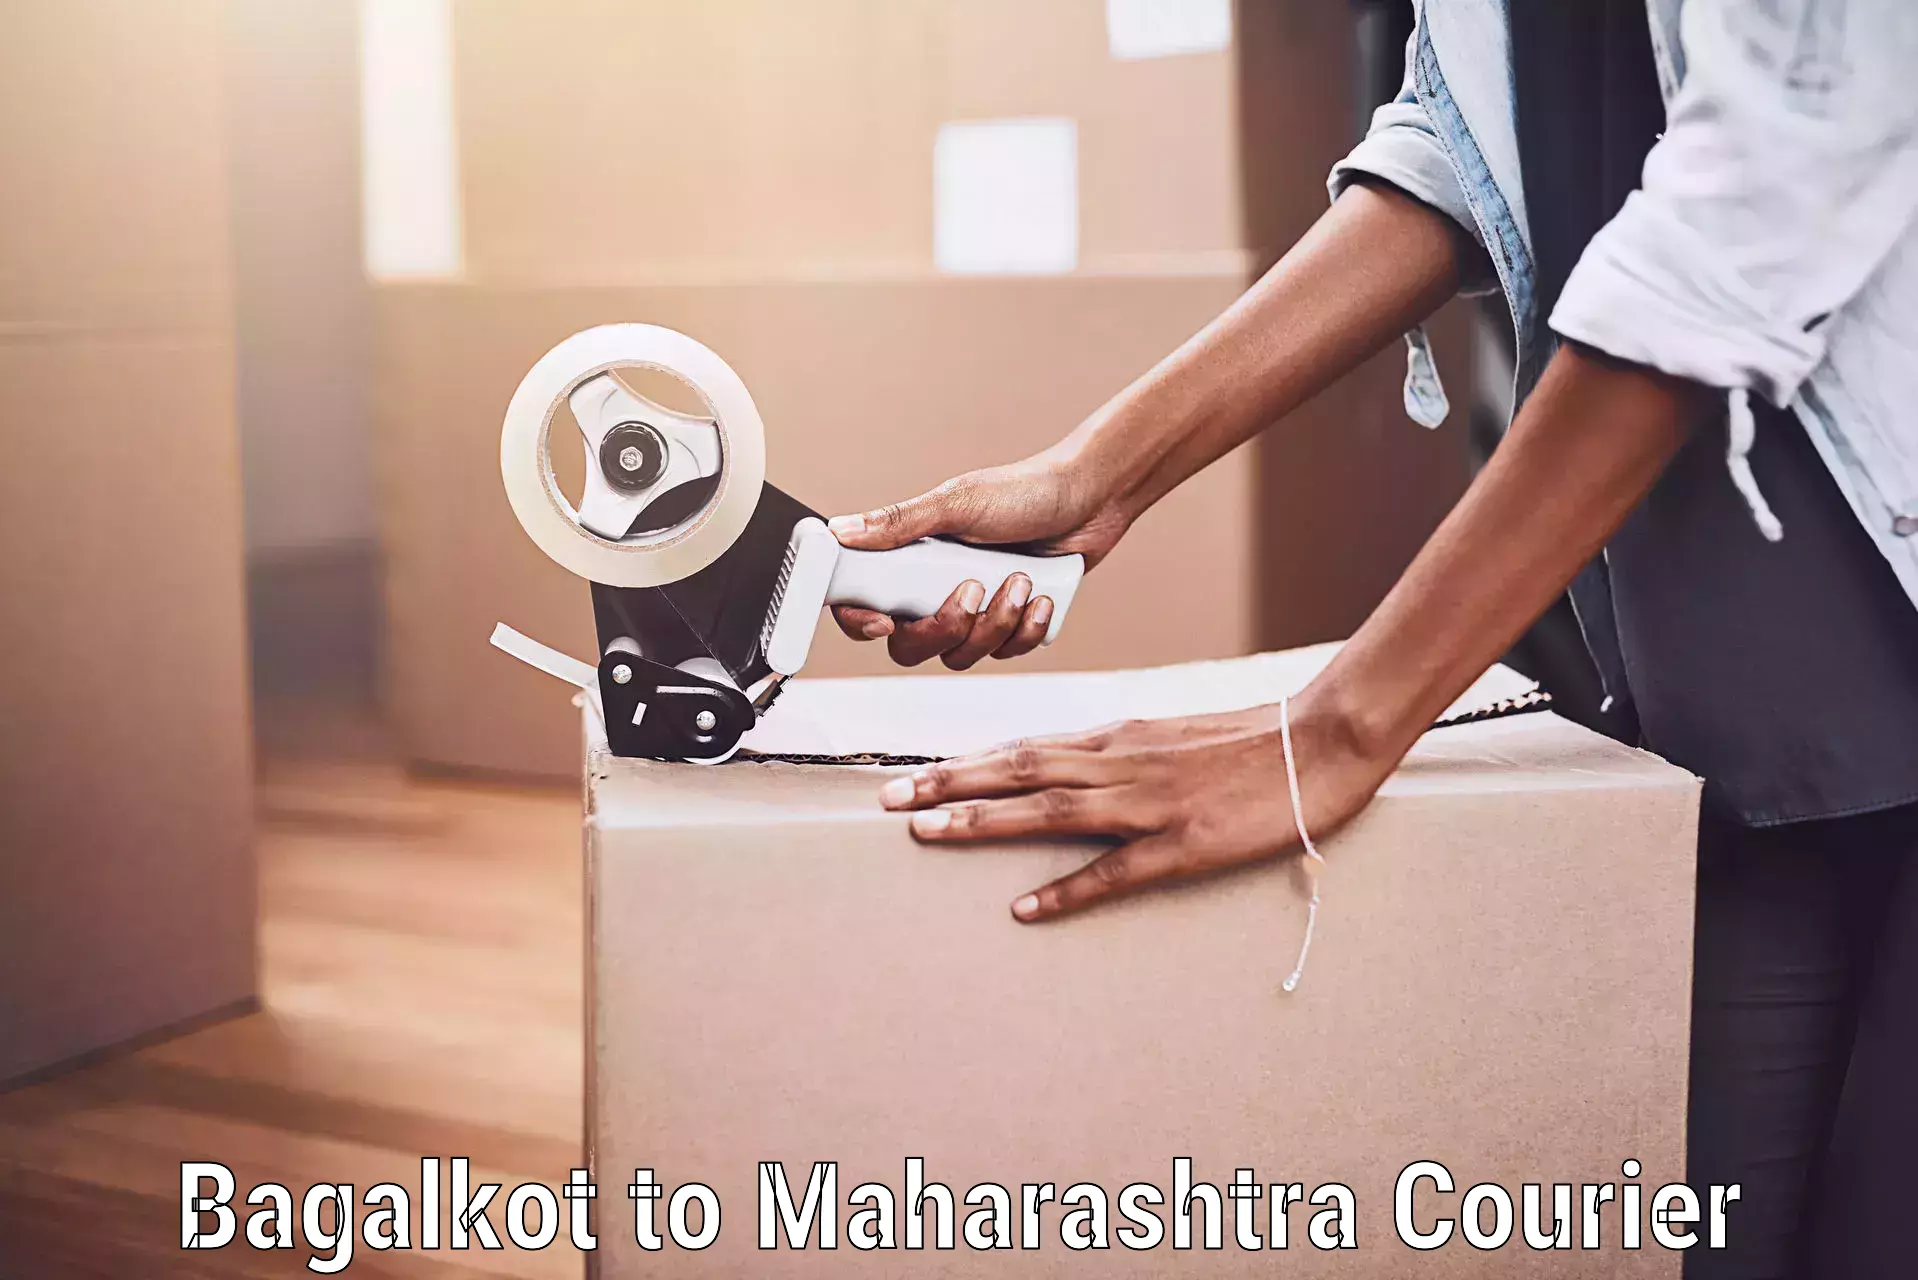 Reliable baggage delivery in Bagalkot to Maharashtra